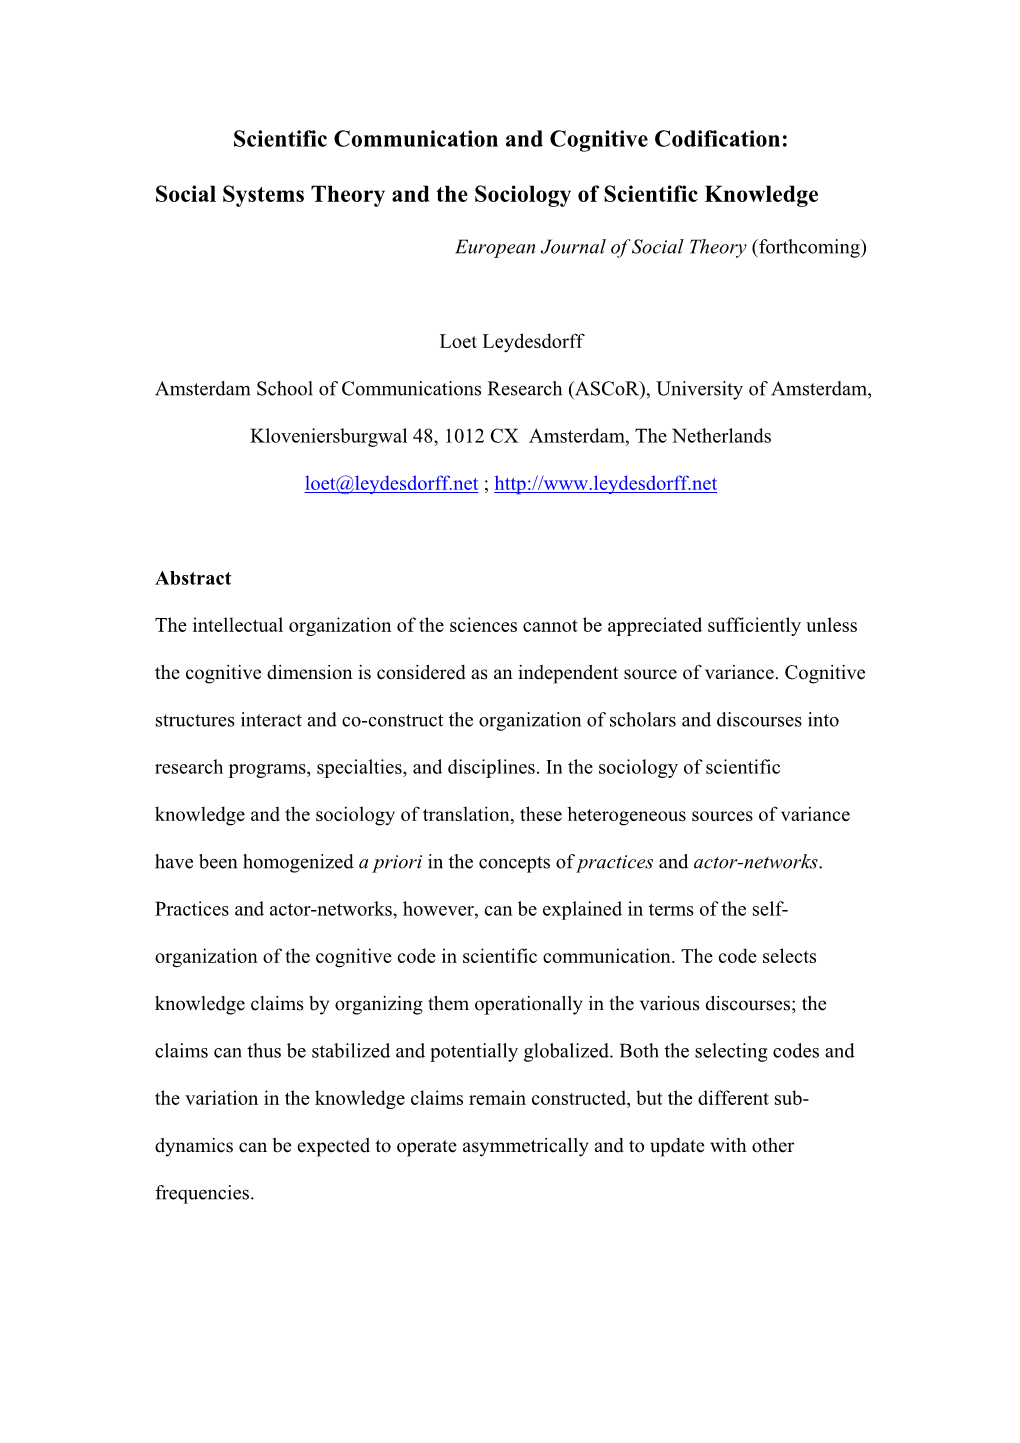 Social Systems Theory and the Sociology of Scientific Knowledge